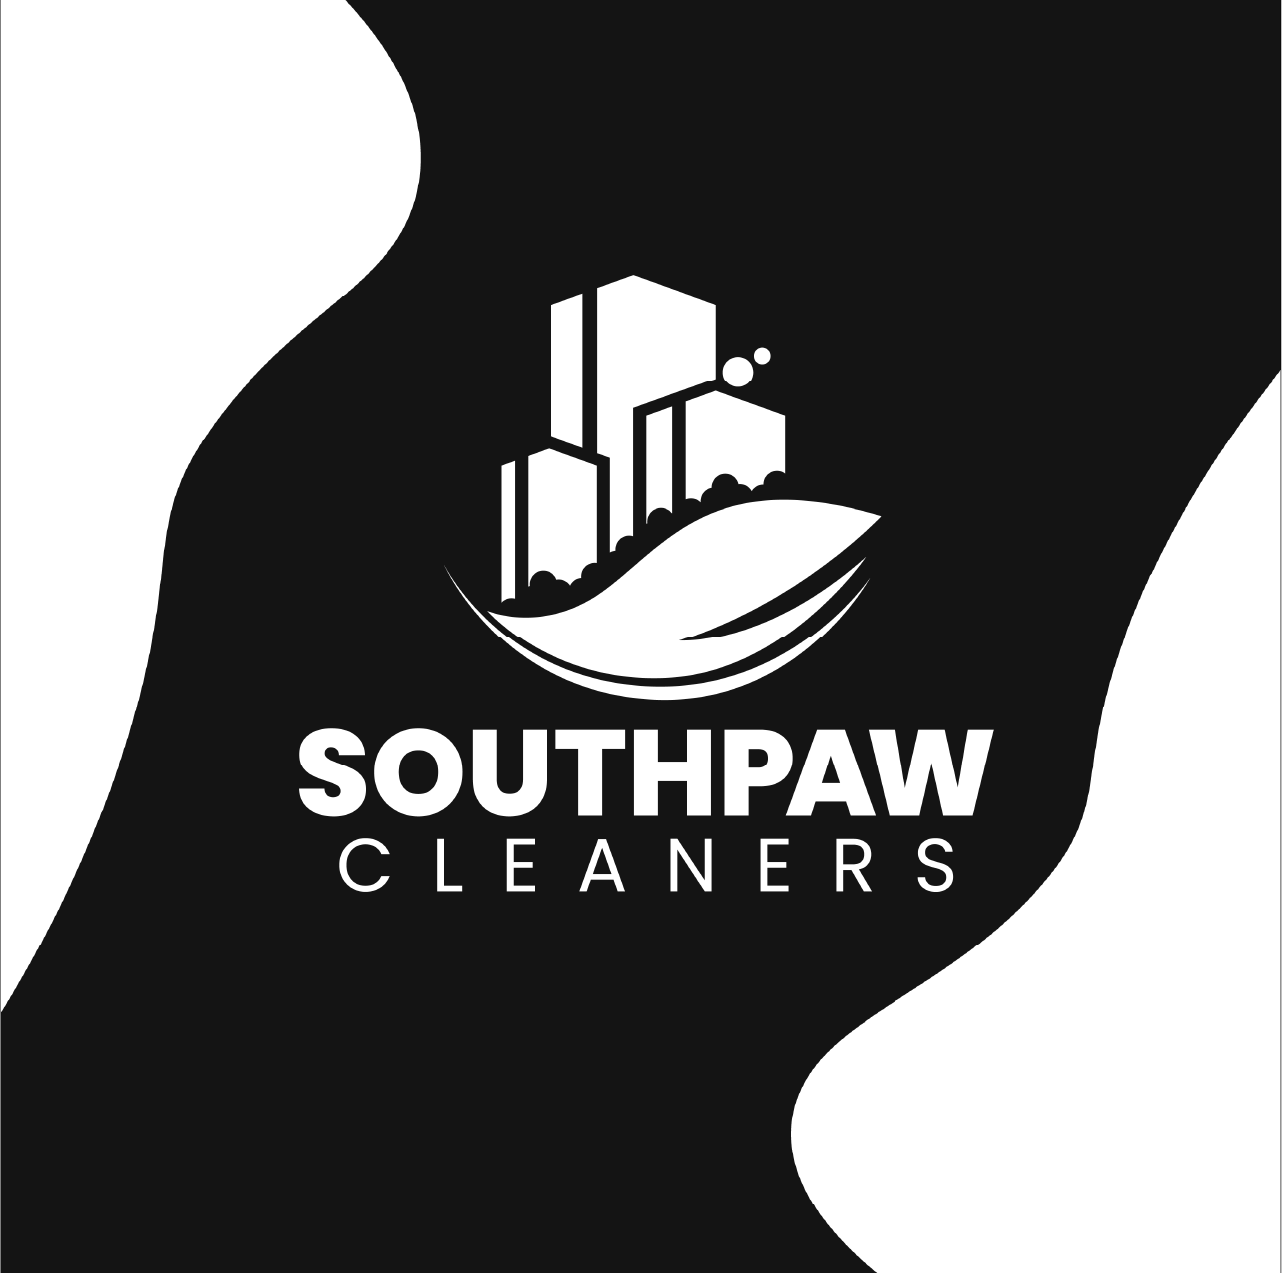 A black and white logo for southpaw cleaners.